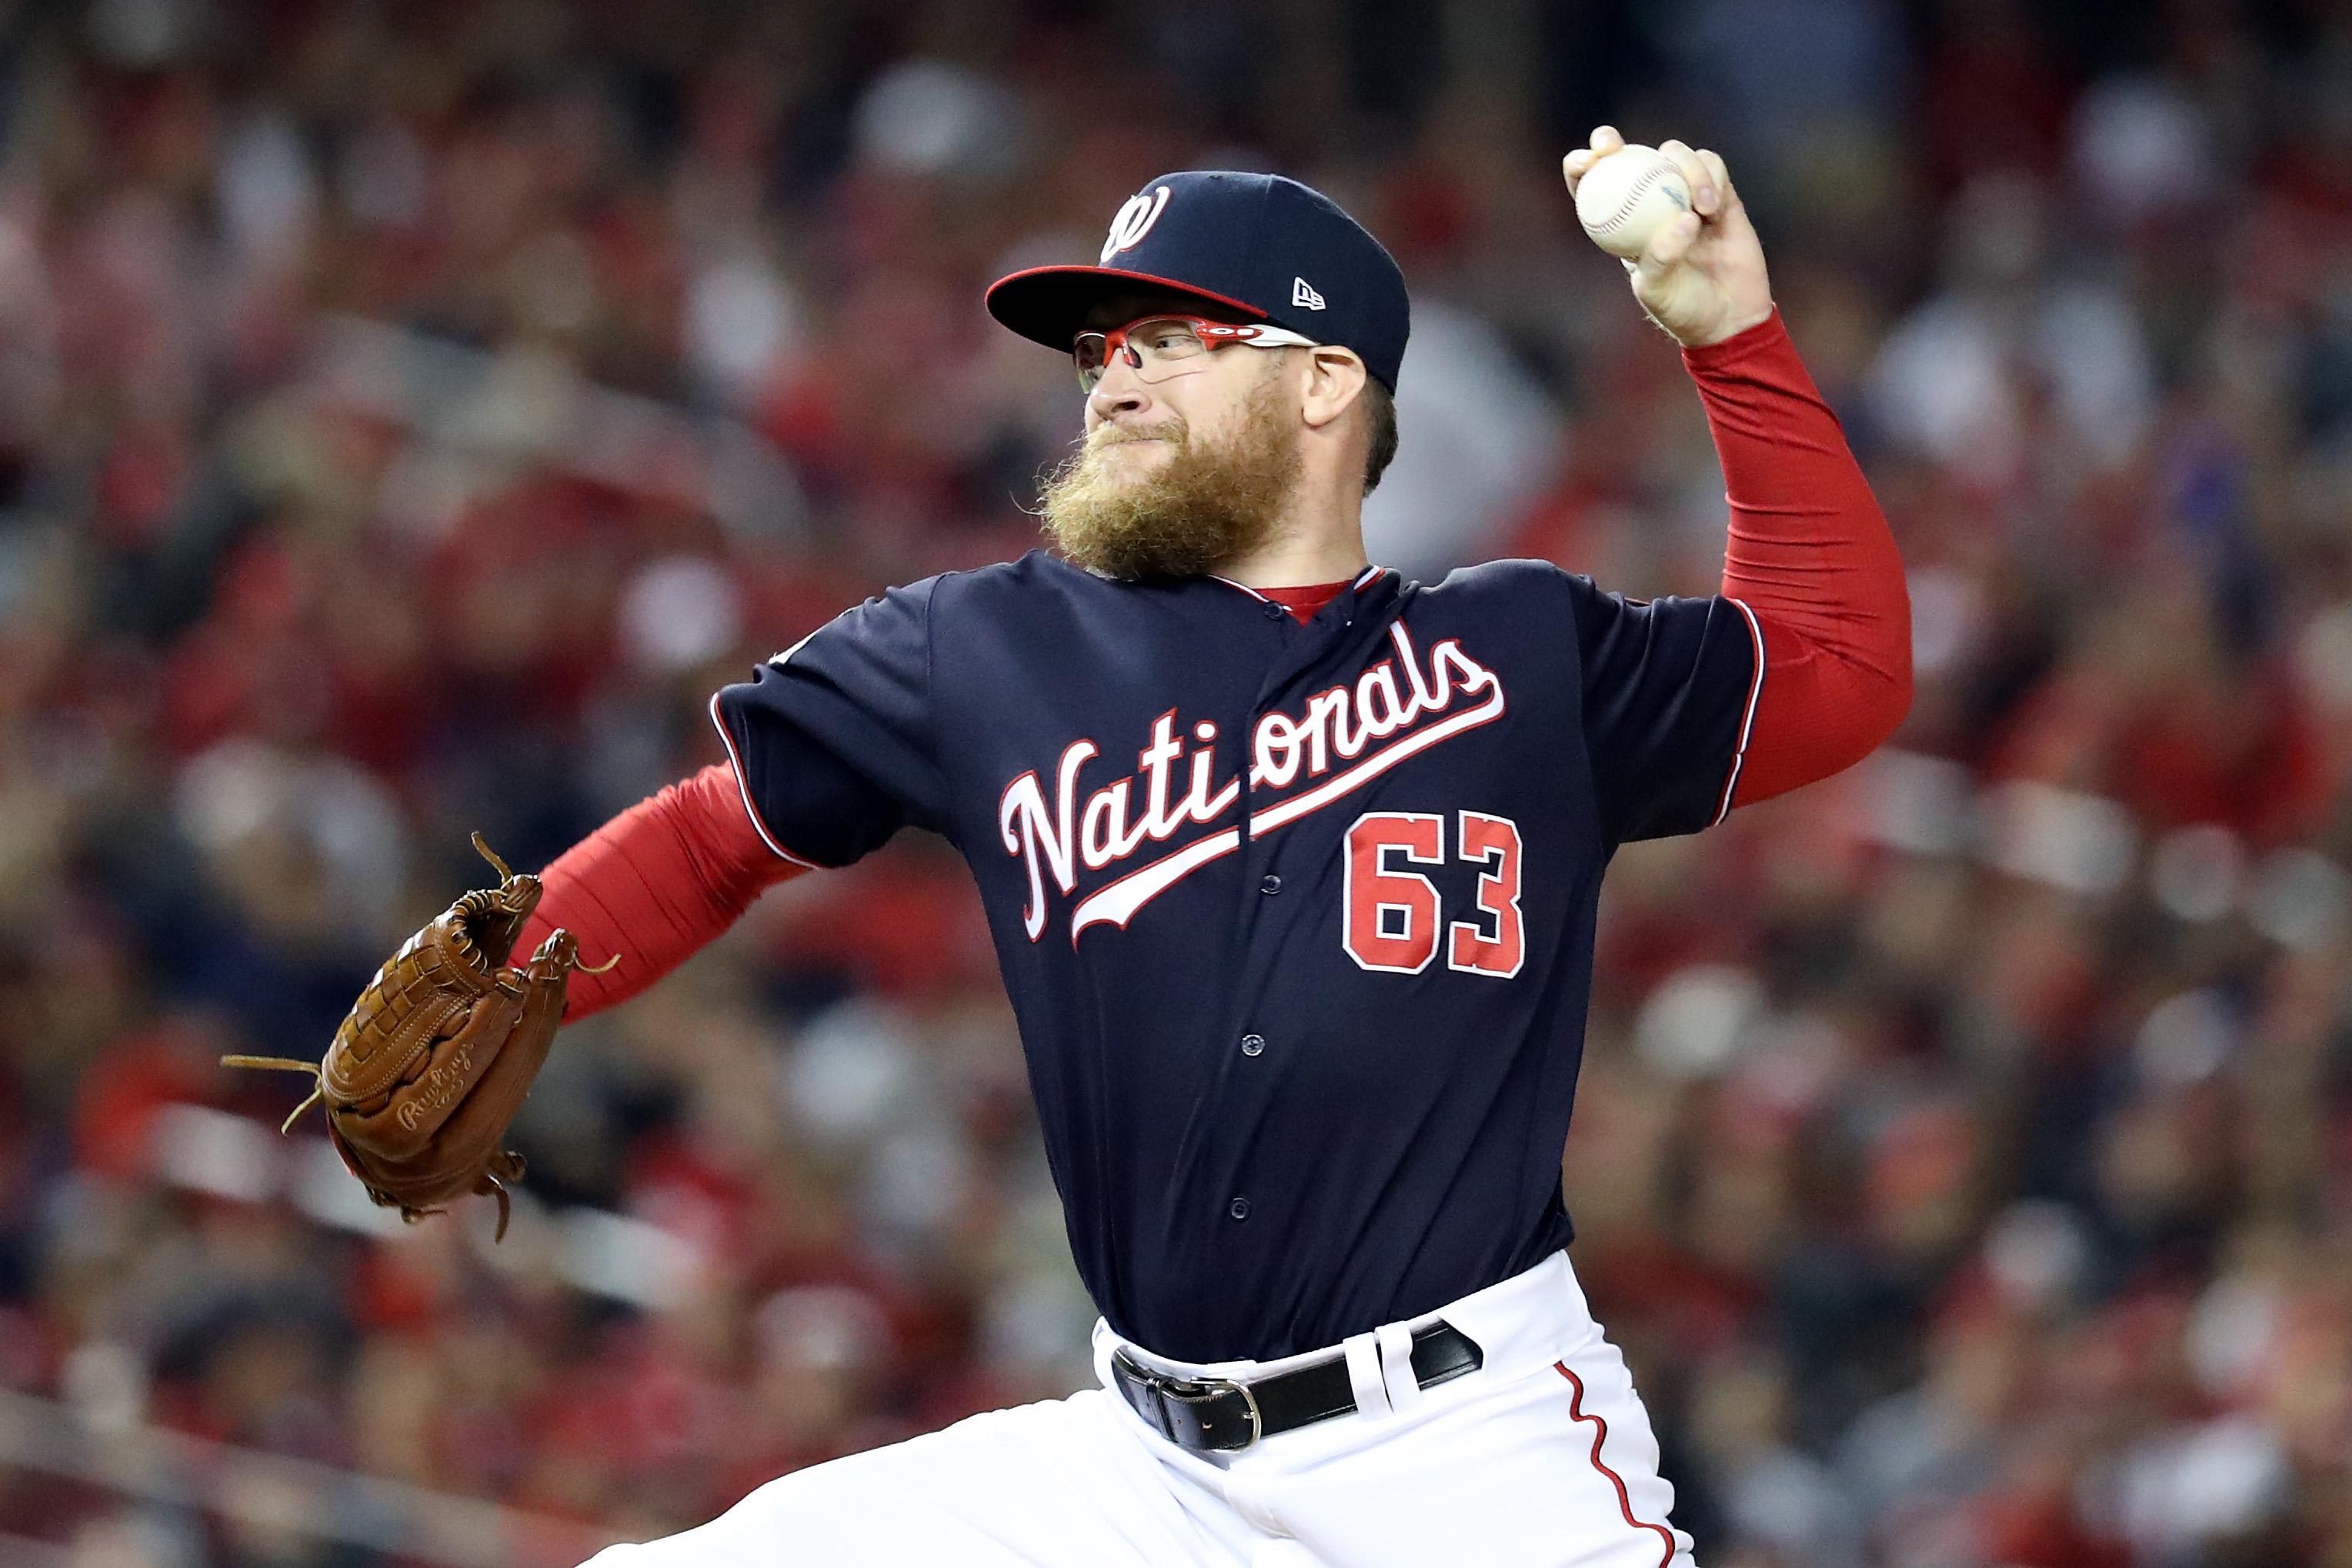 Nationals reliever Sean Doolittle throws a pitch against the Houston Astros during the seventh inning in Game Five.